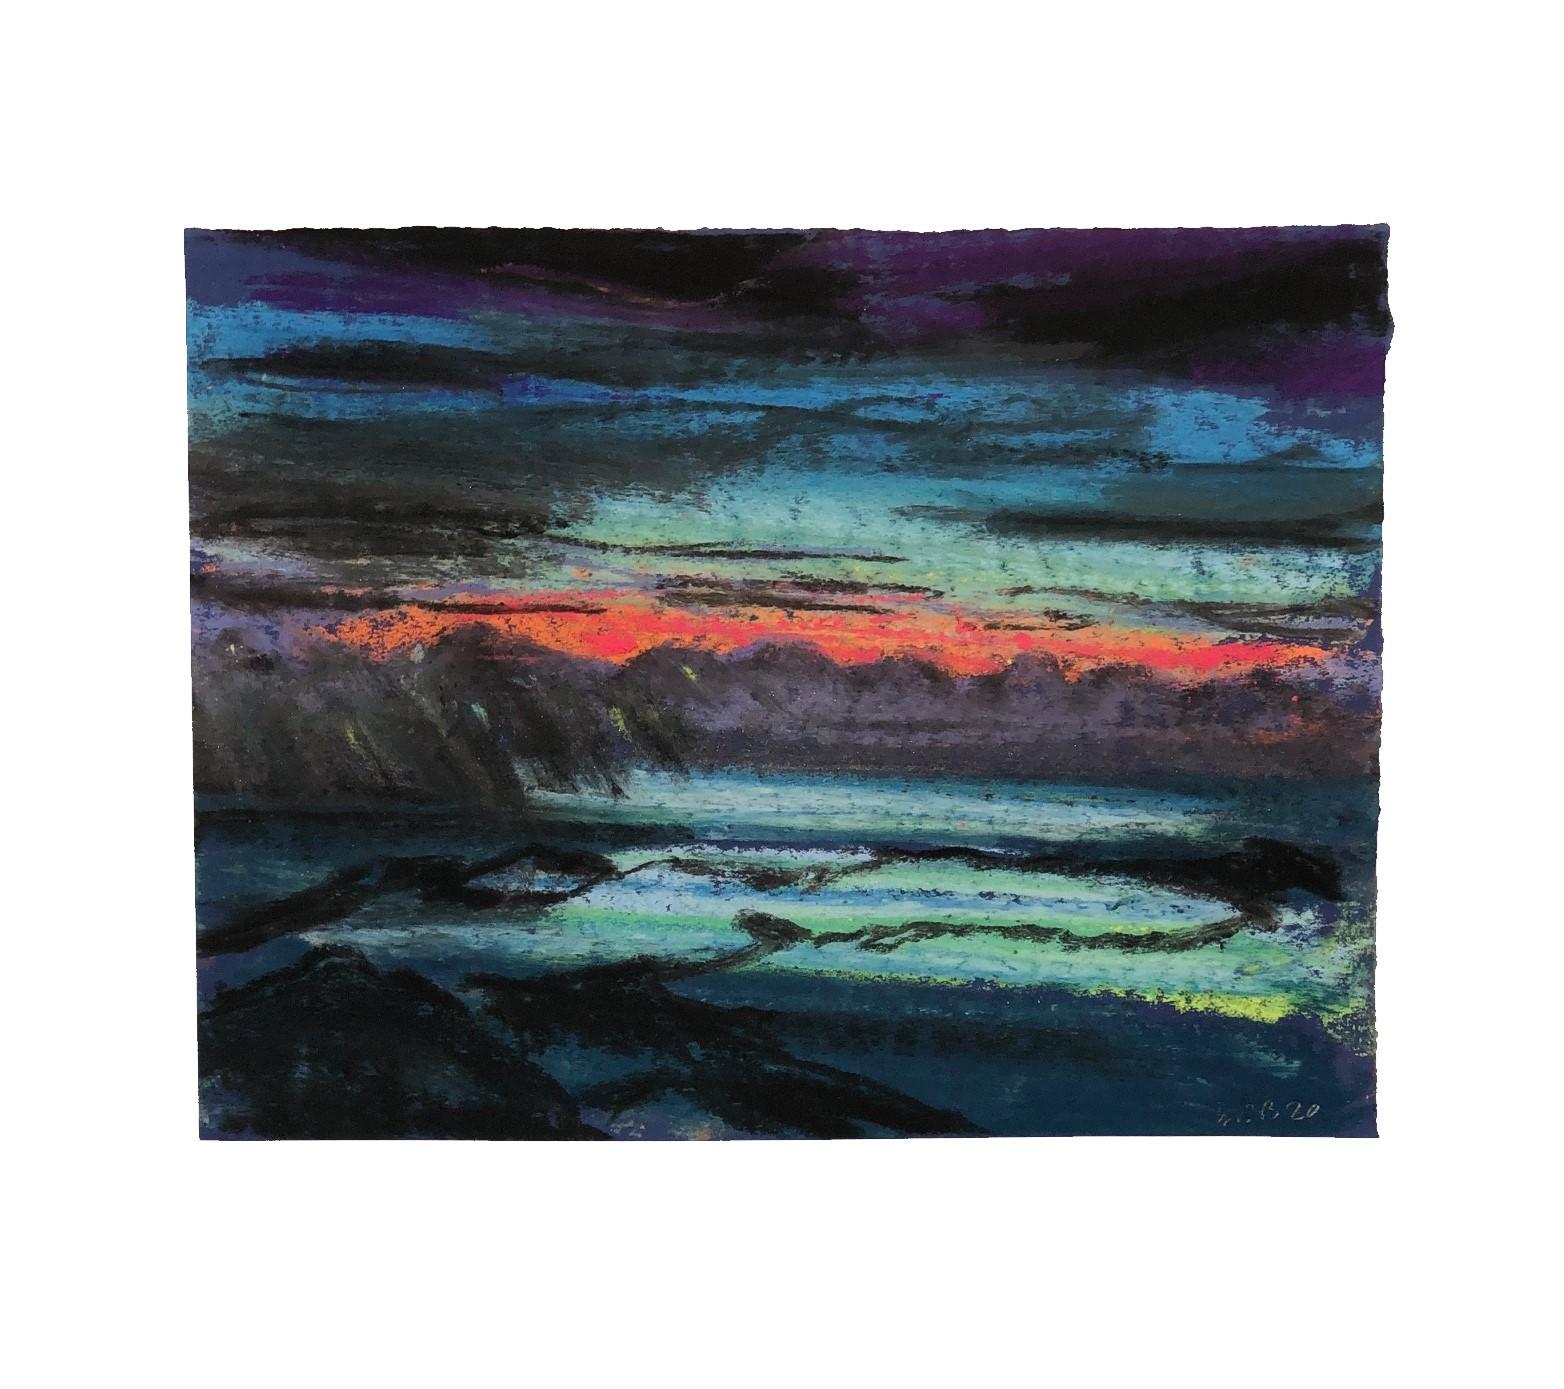 A series of paintings depicting the sunset views from Pic Paradis, the highest point on the island of St. Martin. The paintings capture nature untamed in sea, sky, and sun. 
Images 1-6
Pastels on Bugra Hahnenmühle paper
Each 9” x 12”, 9” x 82”